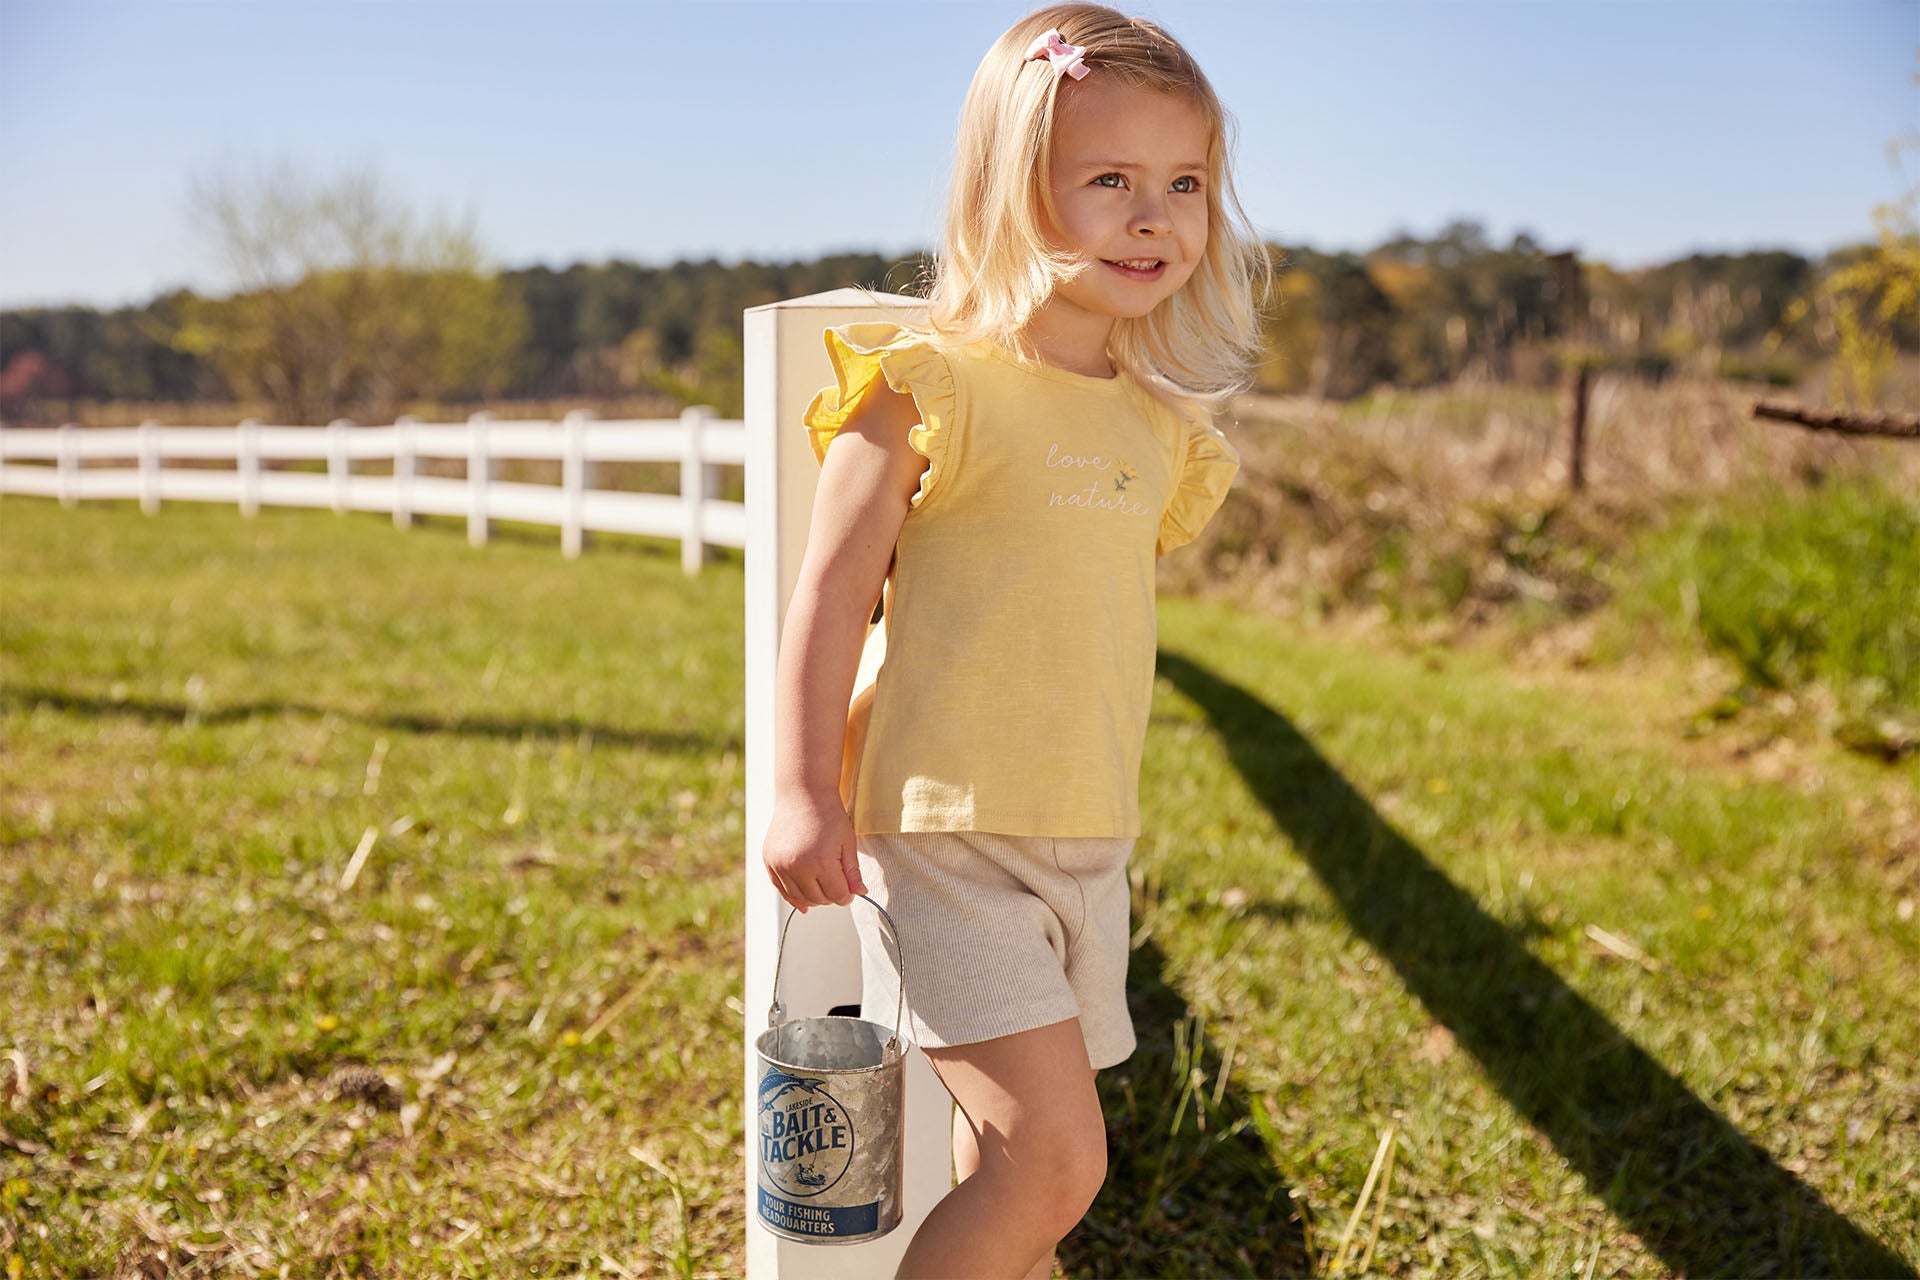 A young girl with blonde hair stands outdoors on a sunny day, holding a small metal bucket. She is wearing a yellow shirt and beige shorts. A white fence and countryside are visible in the background.